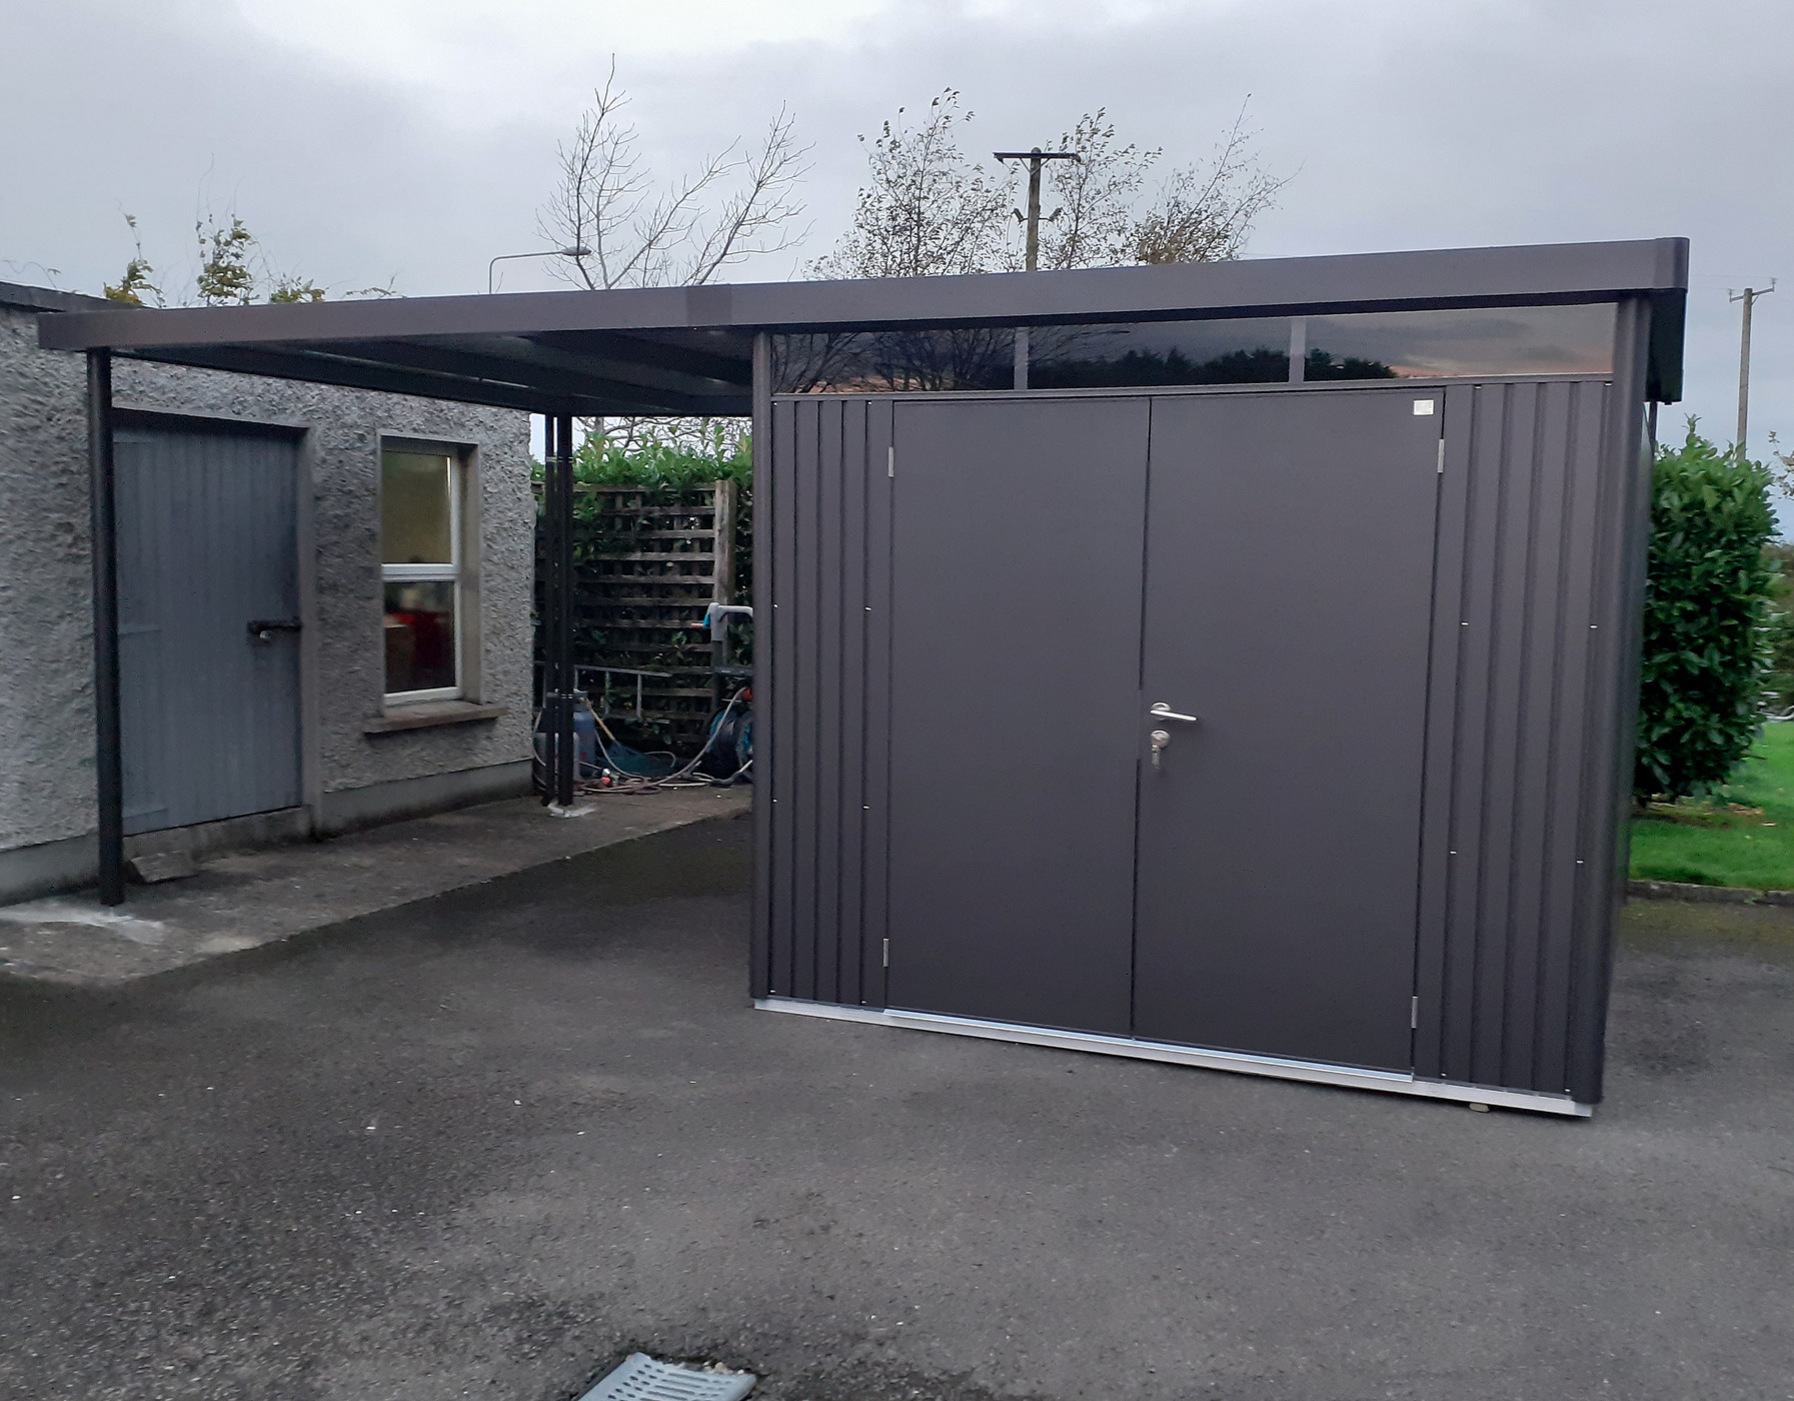 The Biohort HighLine H5 Steel Garden Shed in metallic dark grey with optional accessories including Side Canopy, Double Doors, aluminium floor frame, aluminium floor panels, supplied + fitted in Co Kildare | Owen Chubb Garden Landscaper - Ireland's #1 Biohort Dealer, your one-stop shop for Biohort Sheds & Storage. Shop with confidence. Best Prices in Ireland. Fast Delivery & Installation nationwide. Tel 087-2306128.